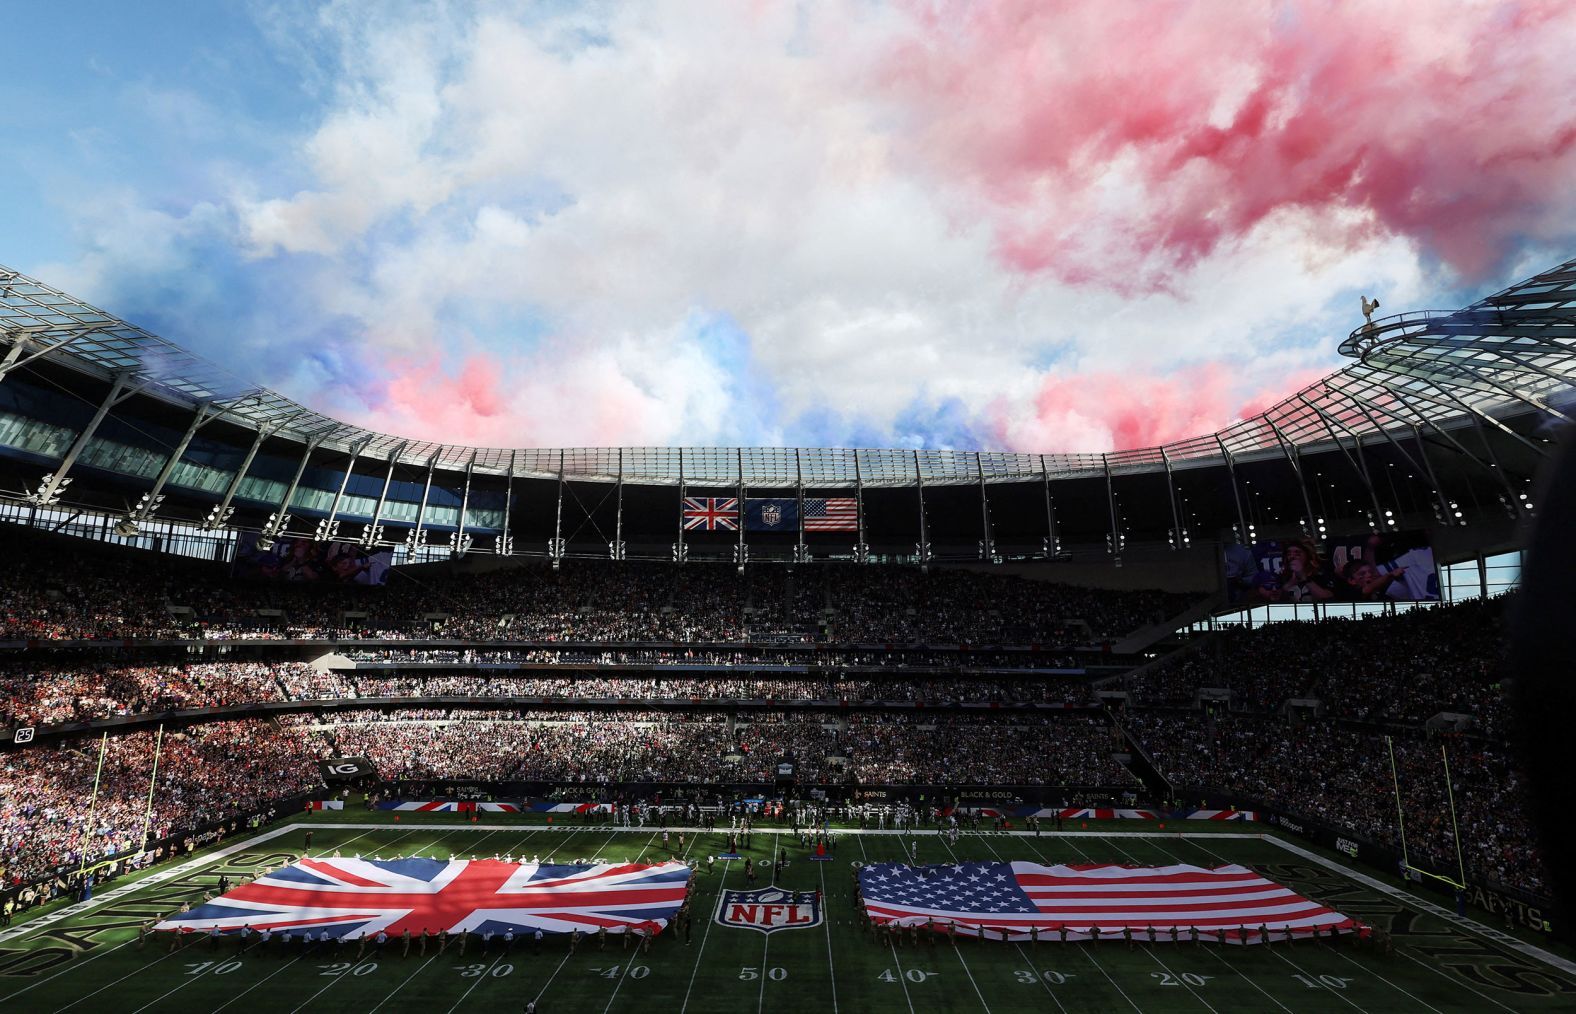 Fireworks and pyrotechnics go off ahead of the Minnesota Vikings and New Orleans Saints clash in London on Sunday, October 2. It was the NFL's 100th international game. The Vikings won 28-25.